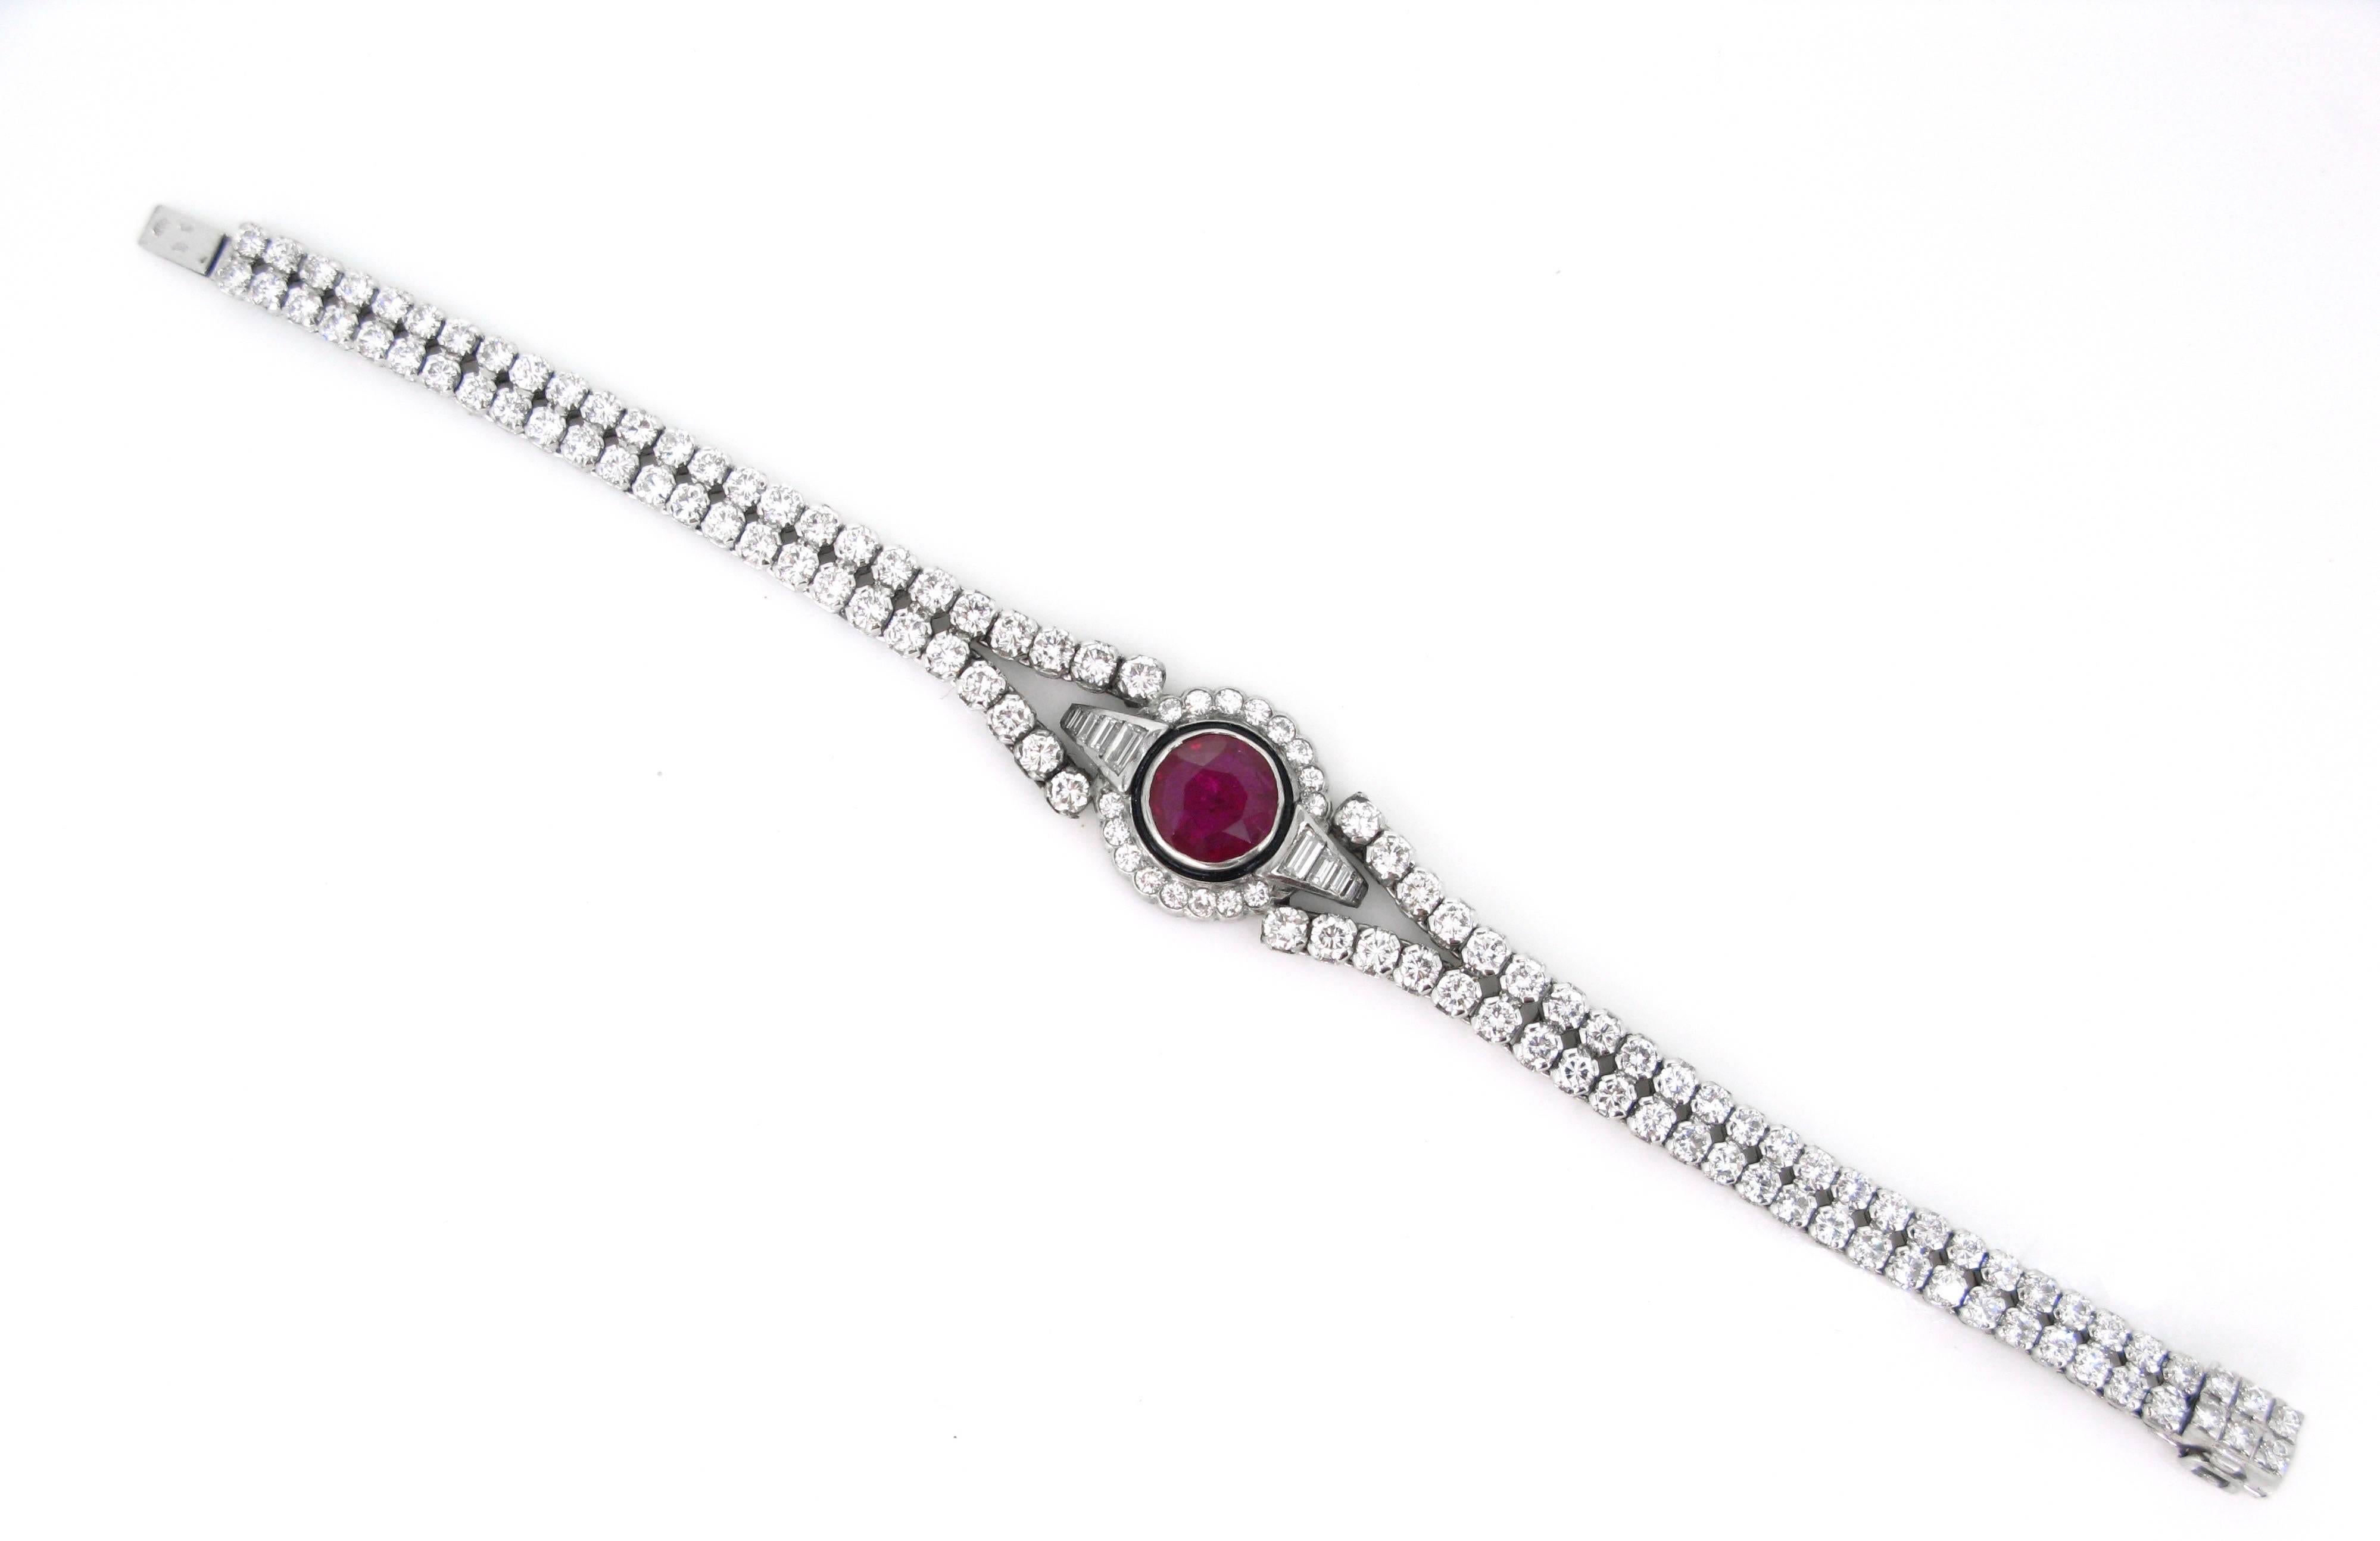 Weight: 23.80gr

Metal: 18kt white Gold and enamel

Stones: 1 Ruby
• Cut: Round
• Carat Weight: 2ct approximately

Others: 124 Diamonds
• Cut: 116 Brilliant cut – 8 tappers
• Total carat weight: 8ct approximately
• Colour: G/H
• Clarity: